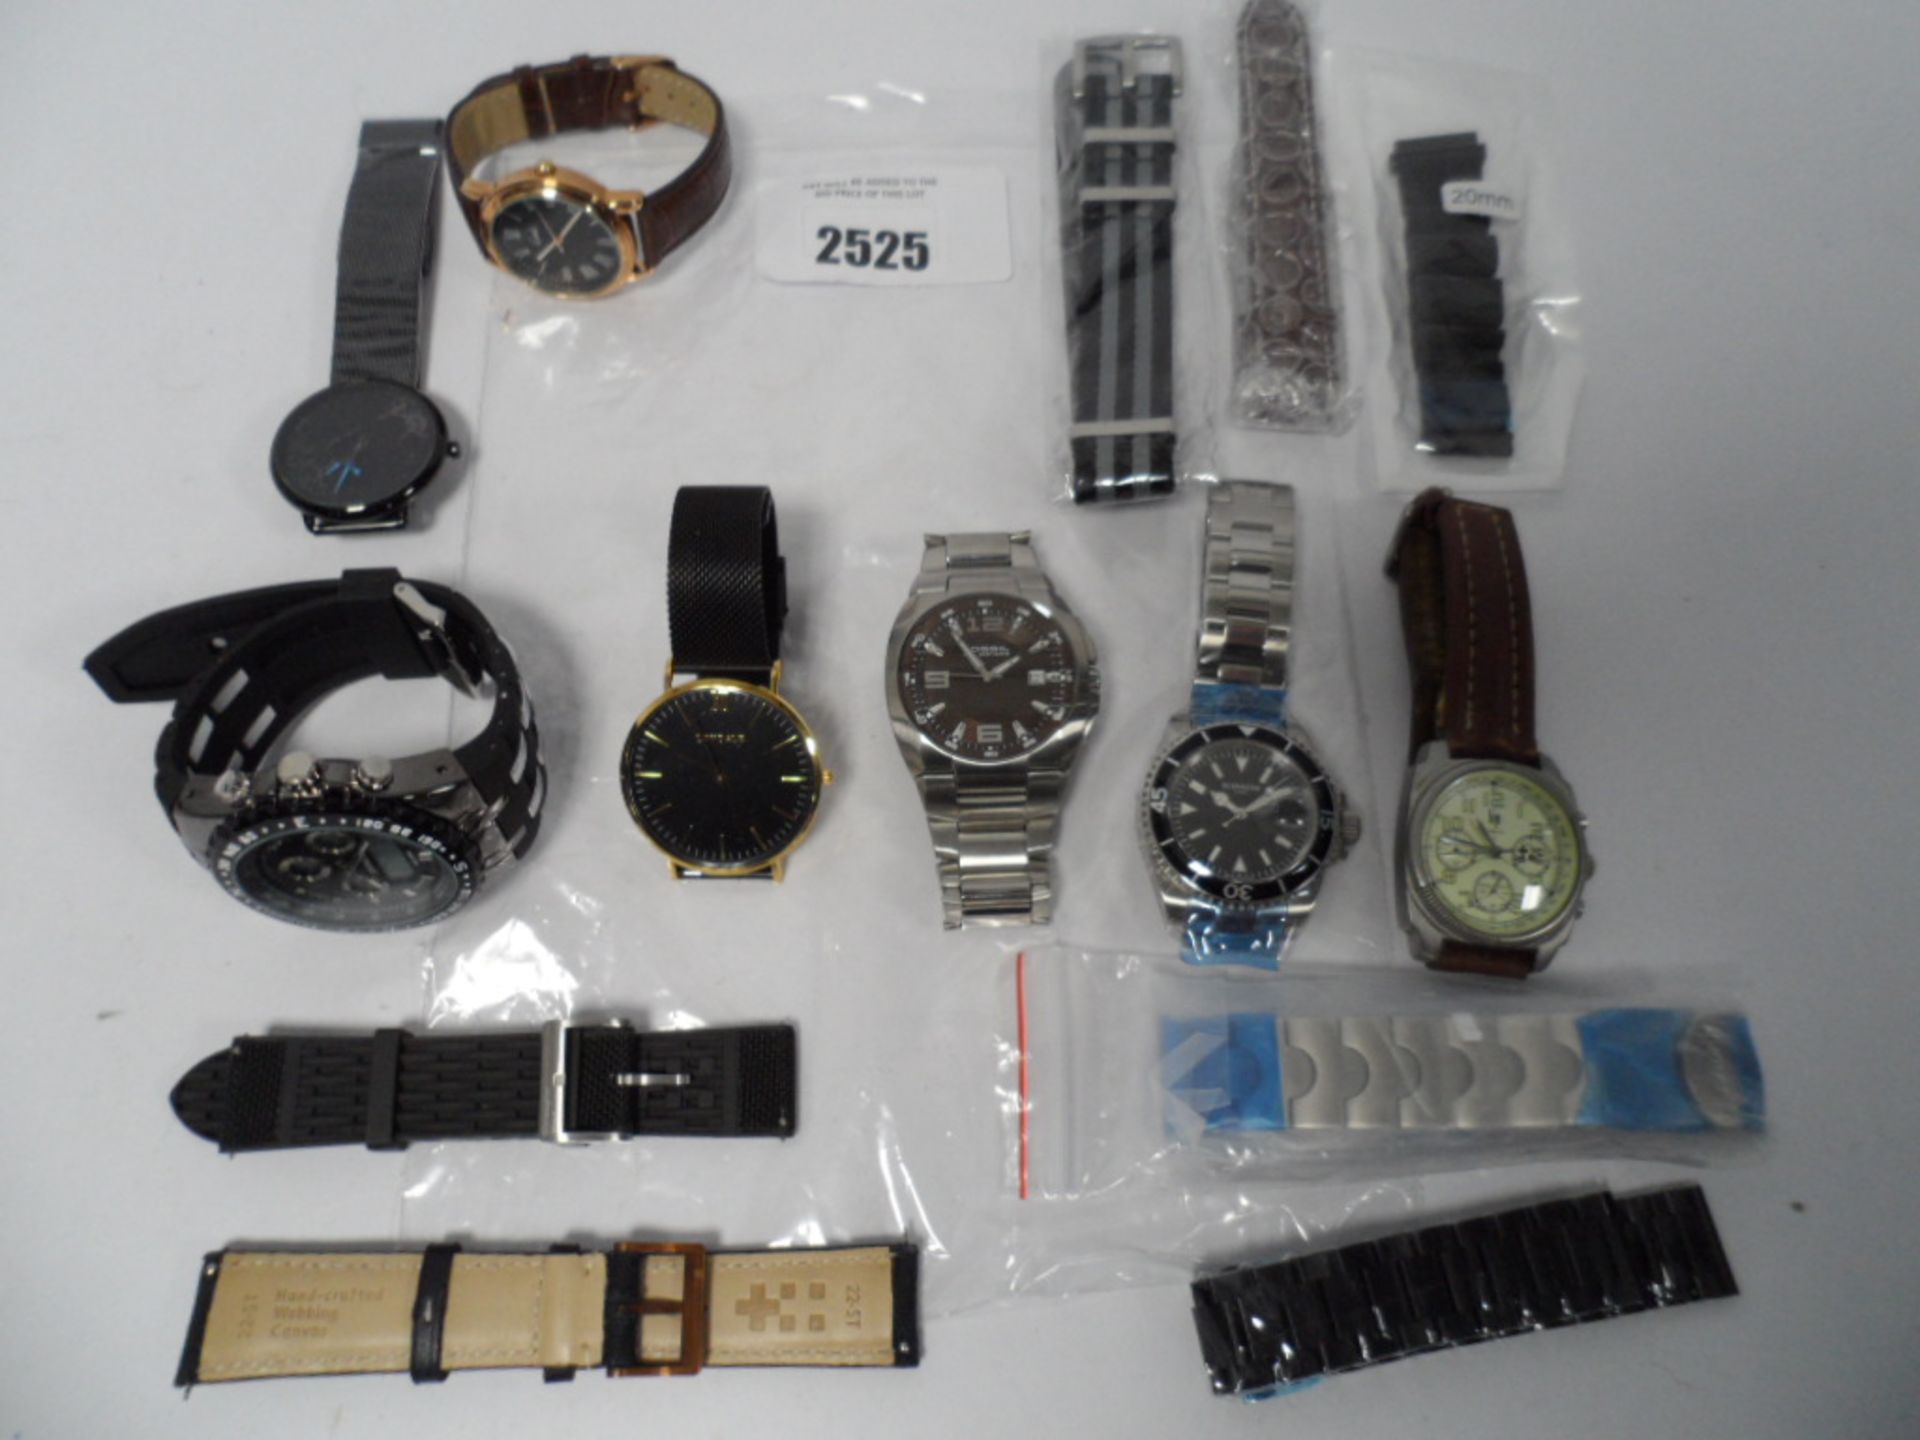 Bag of loose watches and straps including Fossil, Lokdale, Lip, etc.